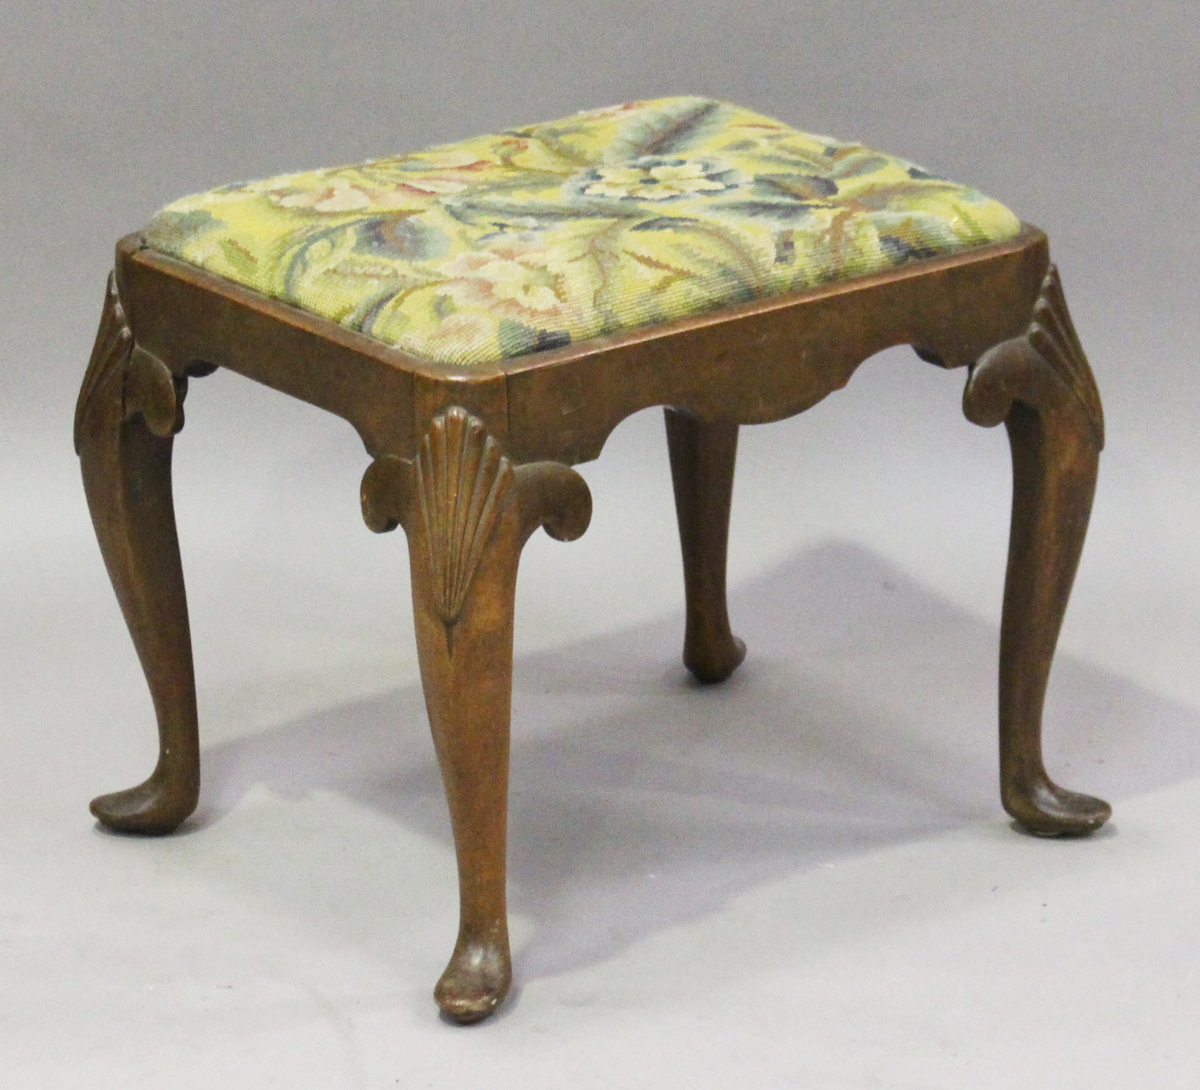 An early 20th century Queen Anne style walnut stool, the drop-in woolwork seat on scallop shell